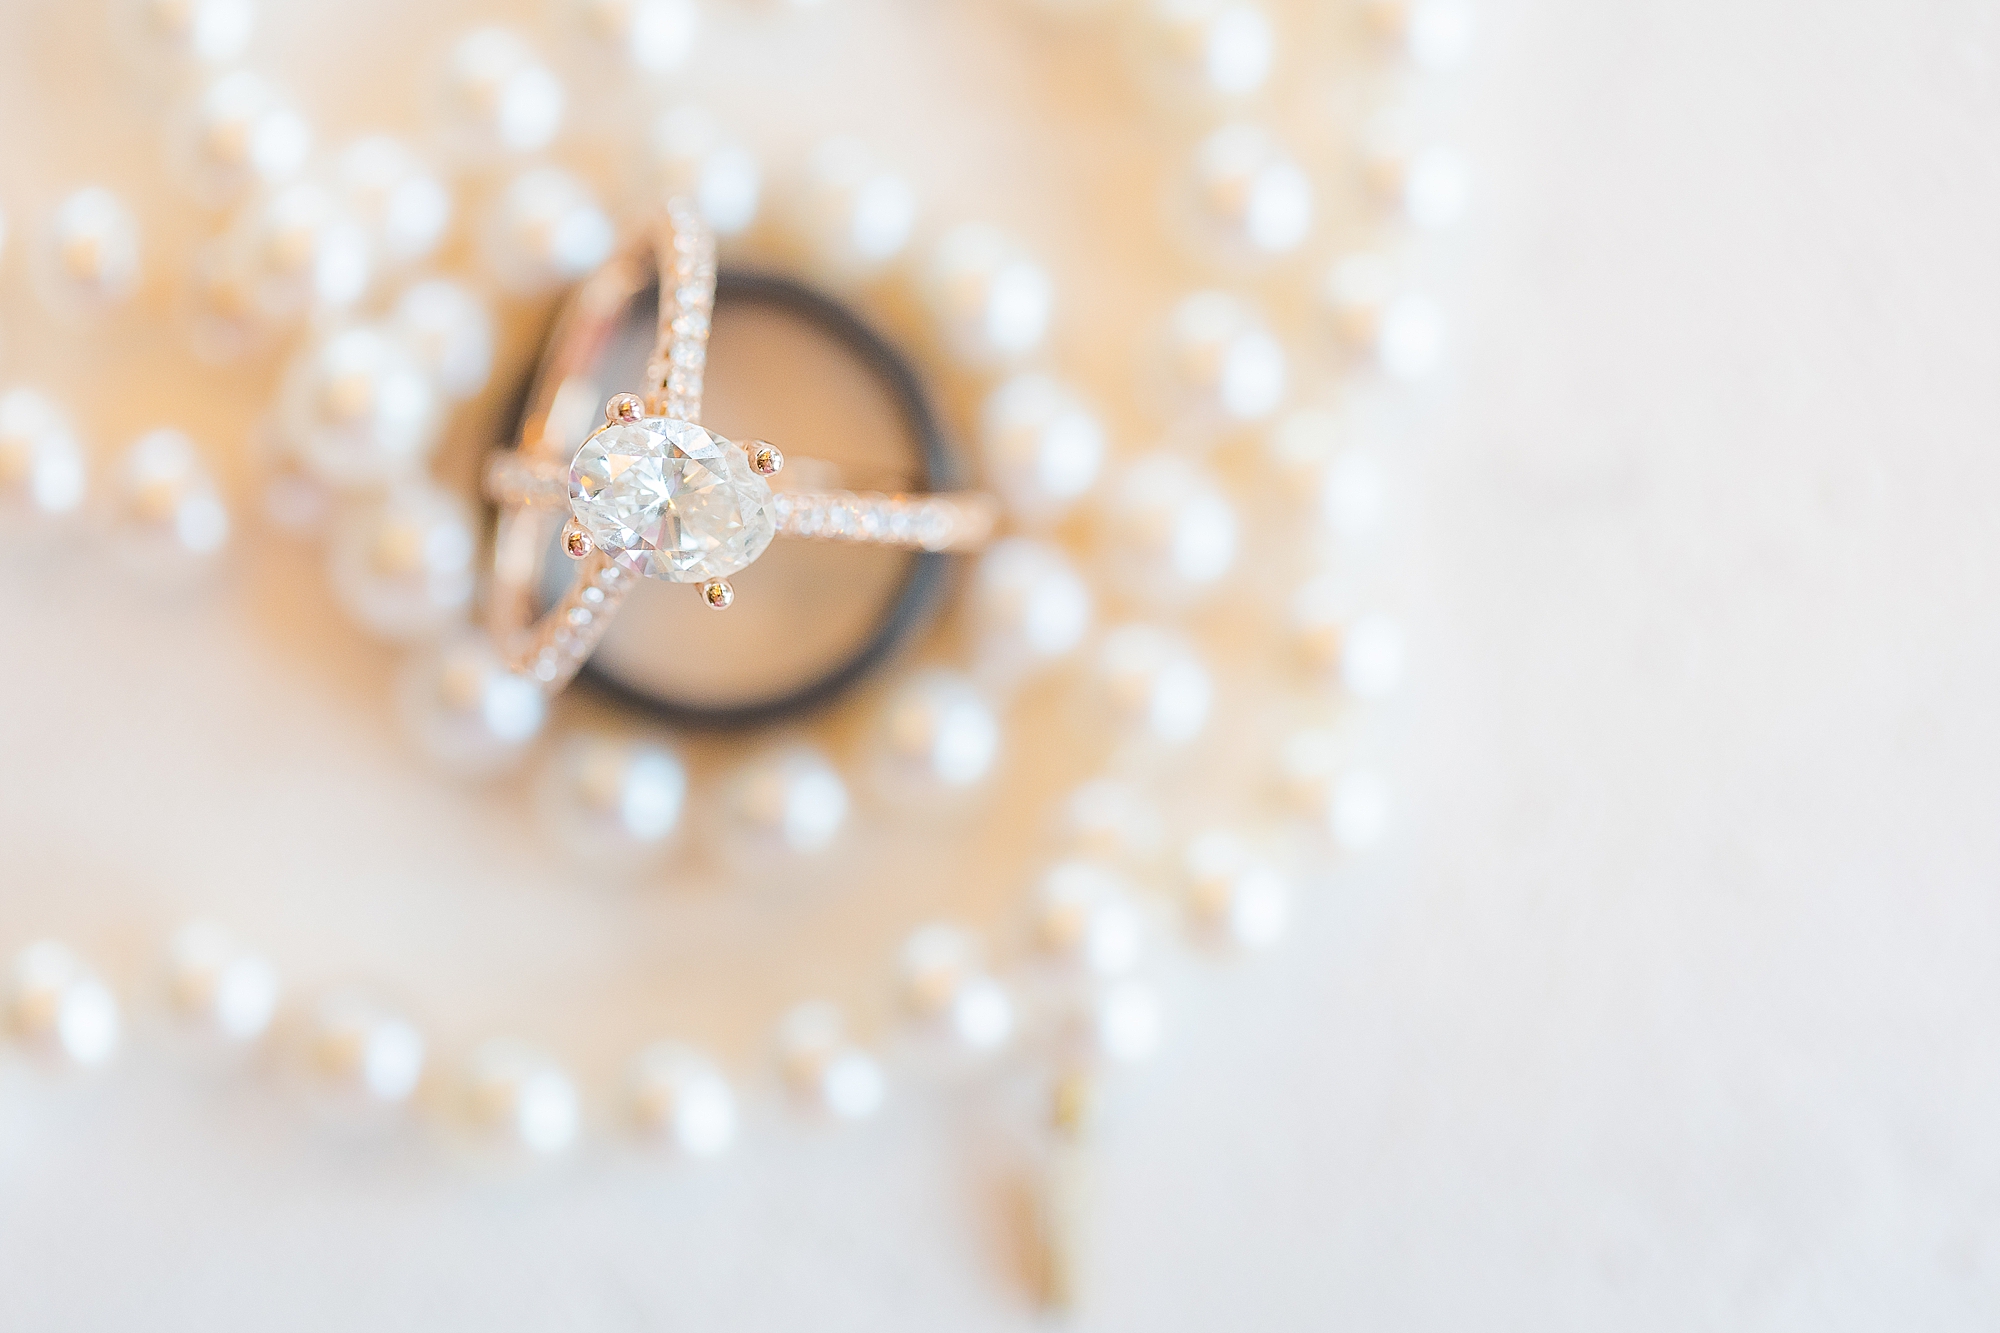 bride's rings rest among pearls for OBX wedding